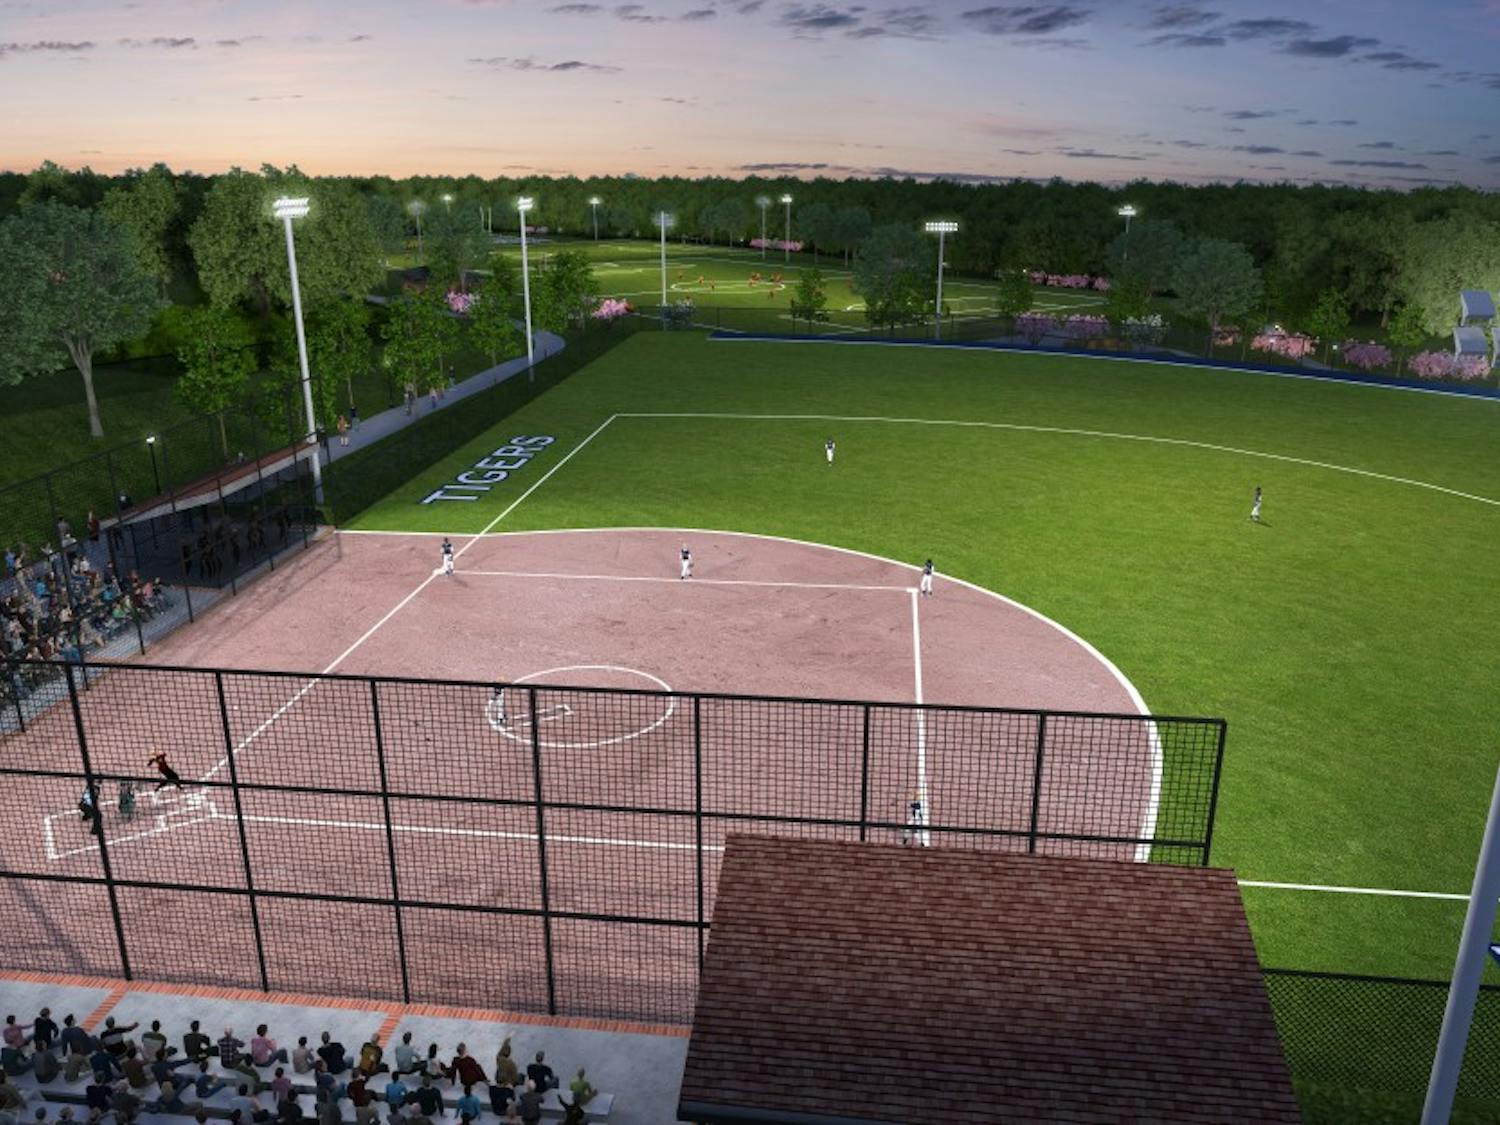 Design rendering of the softball field for the recreation field expansion project.